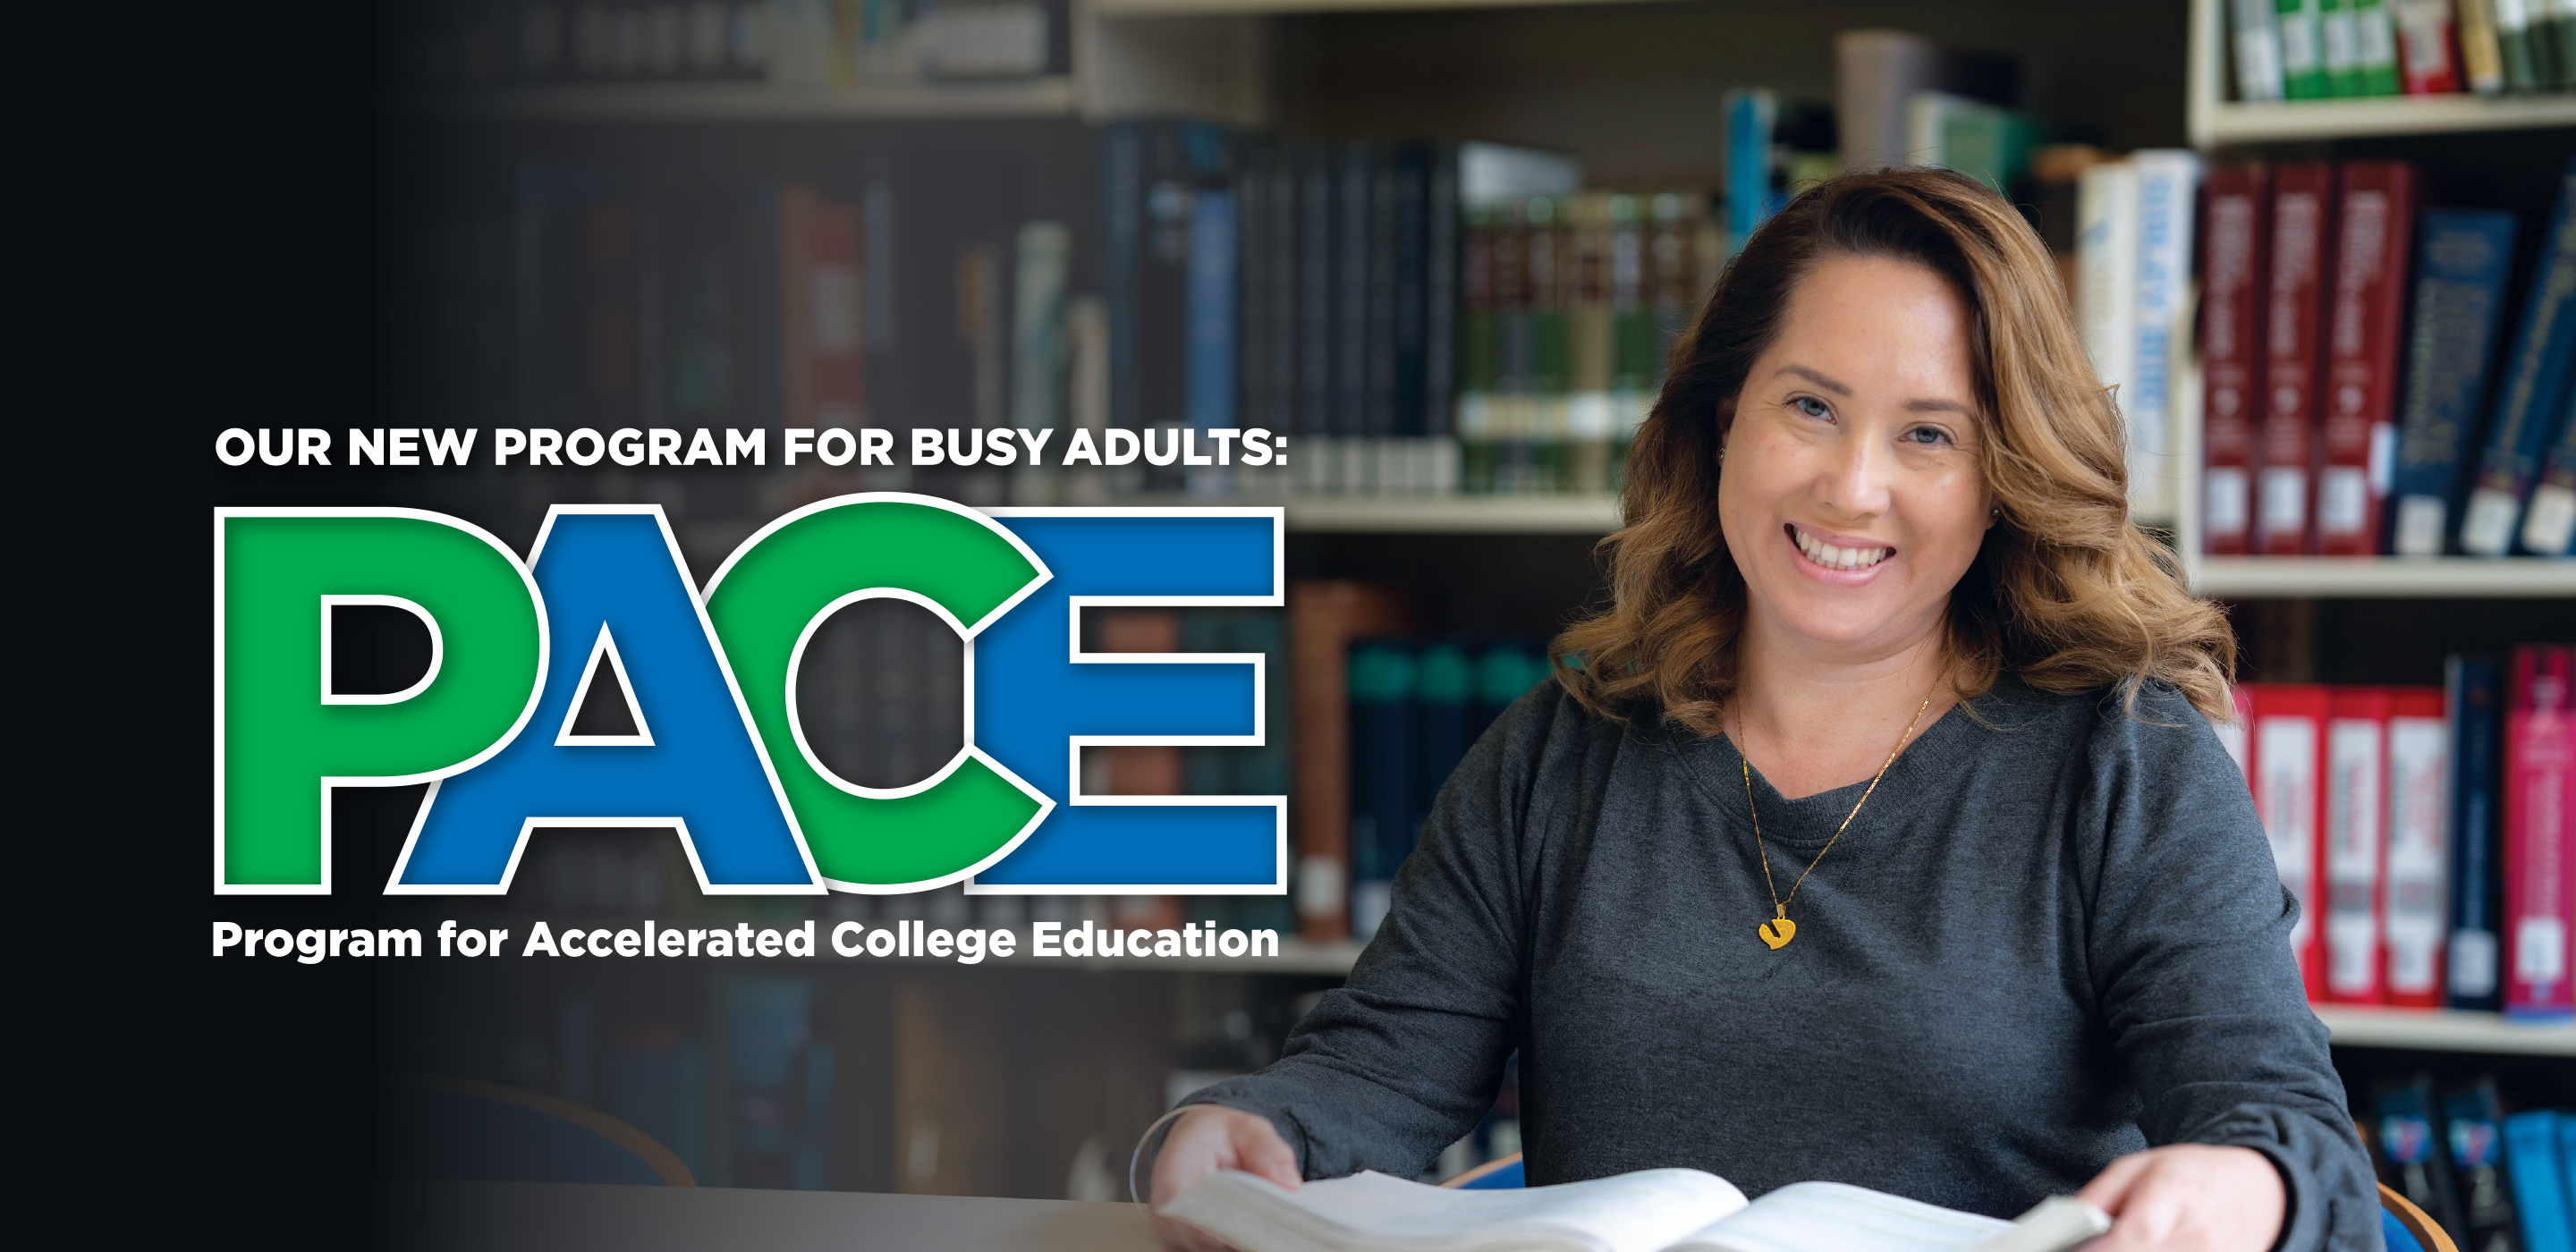 PACE Program for Accelerated Education